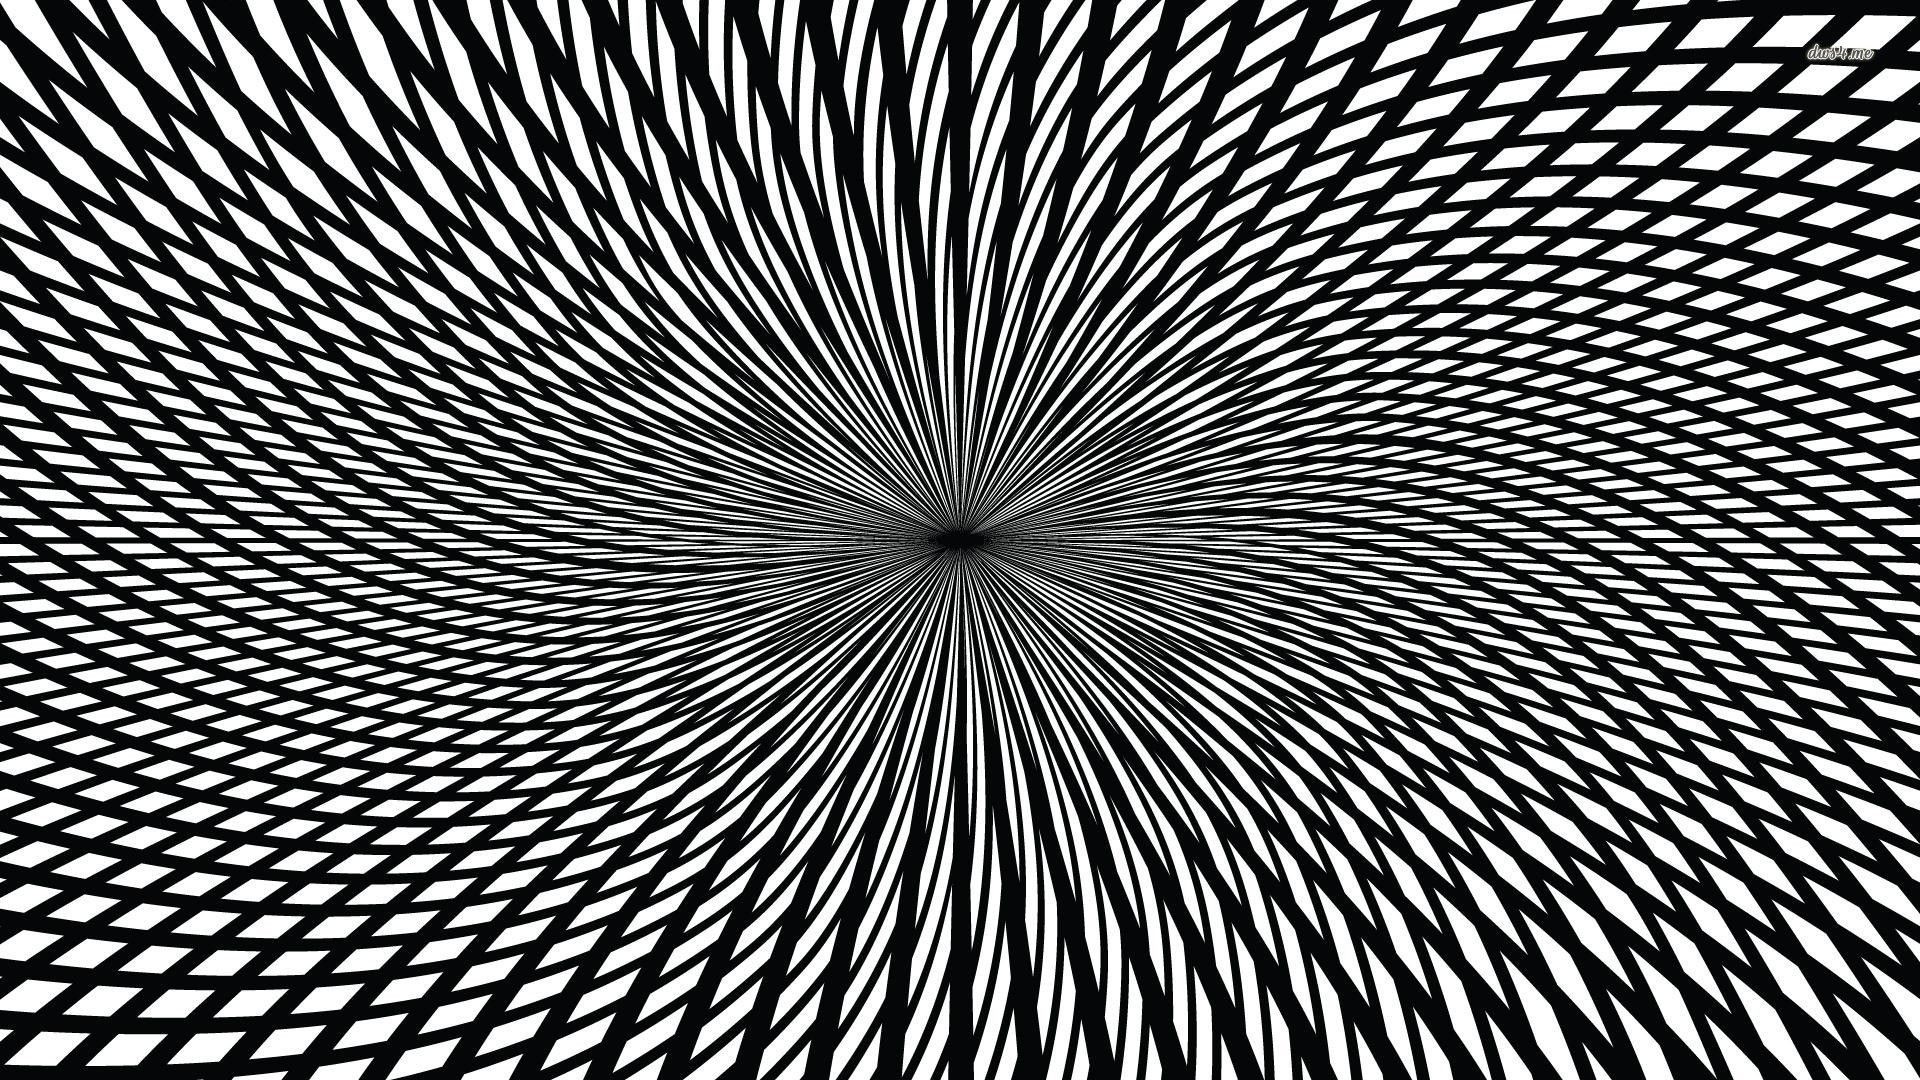 1920x1080 Optical illusion wallpaper - Abstract wallpapers - #20655